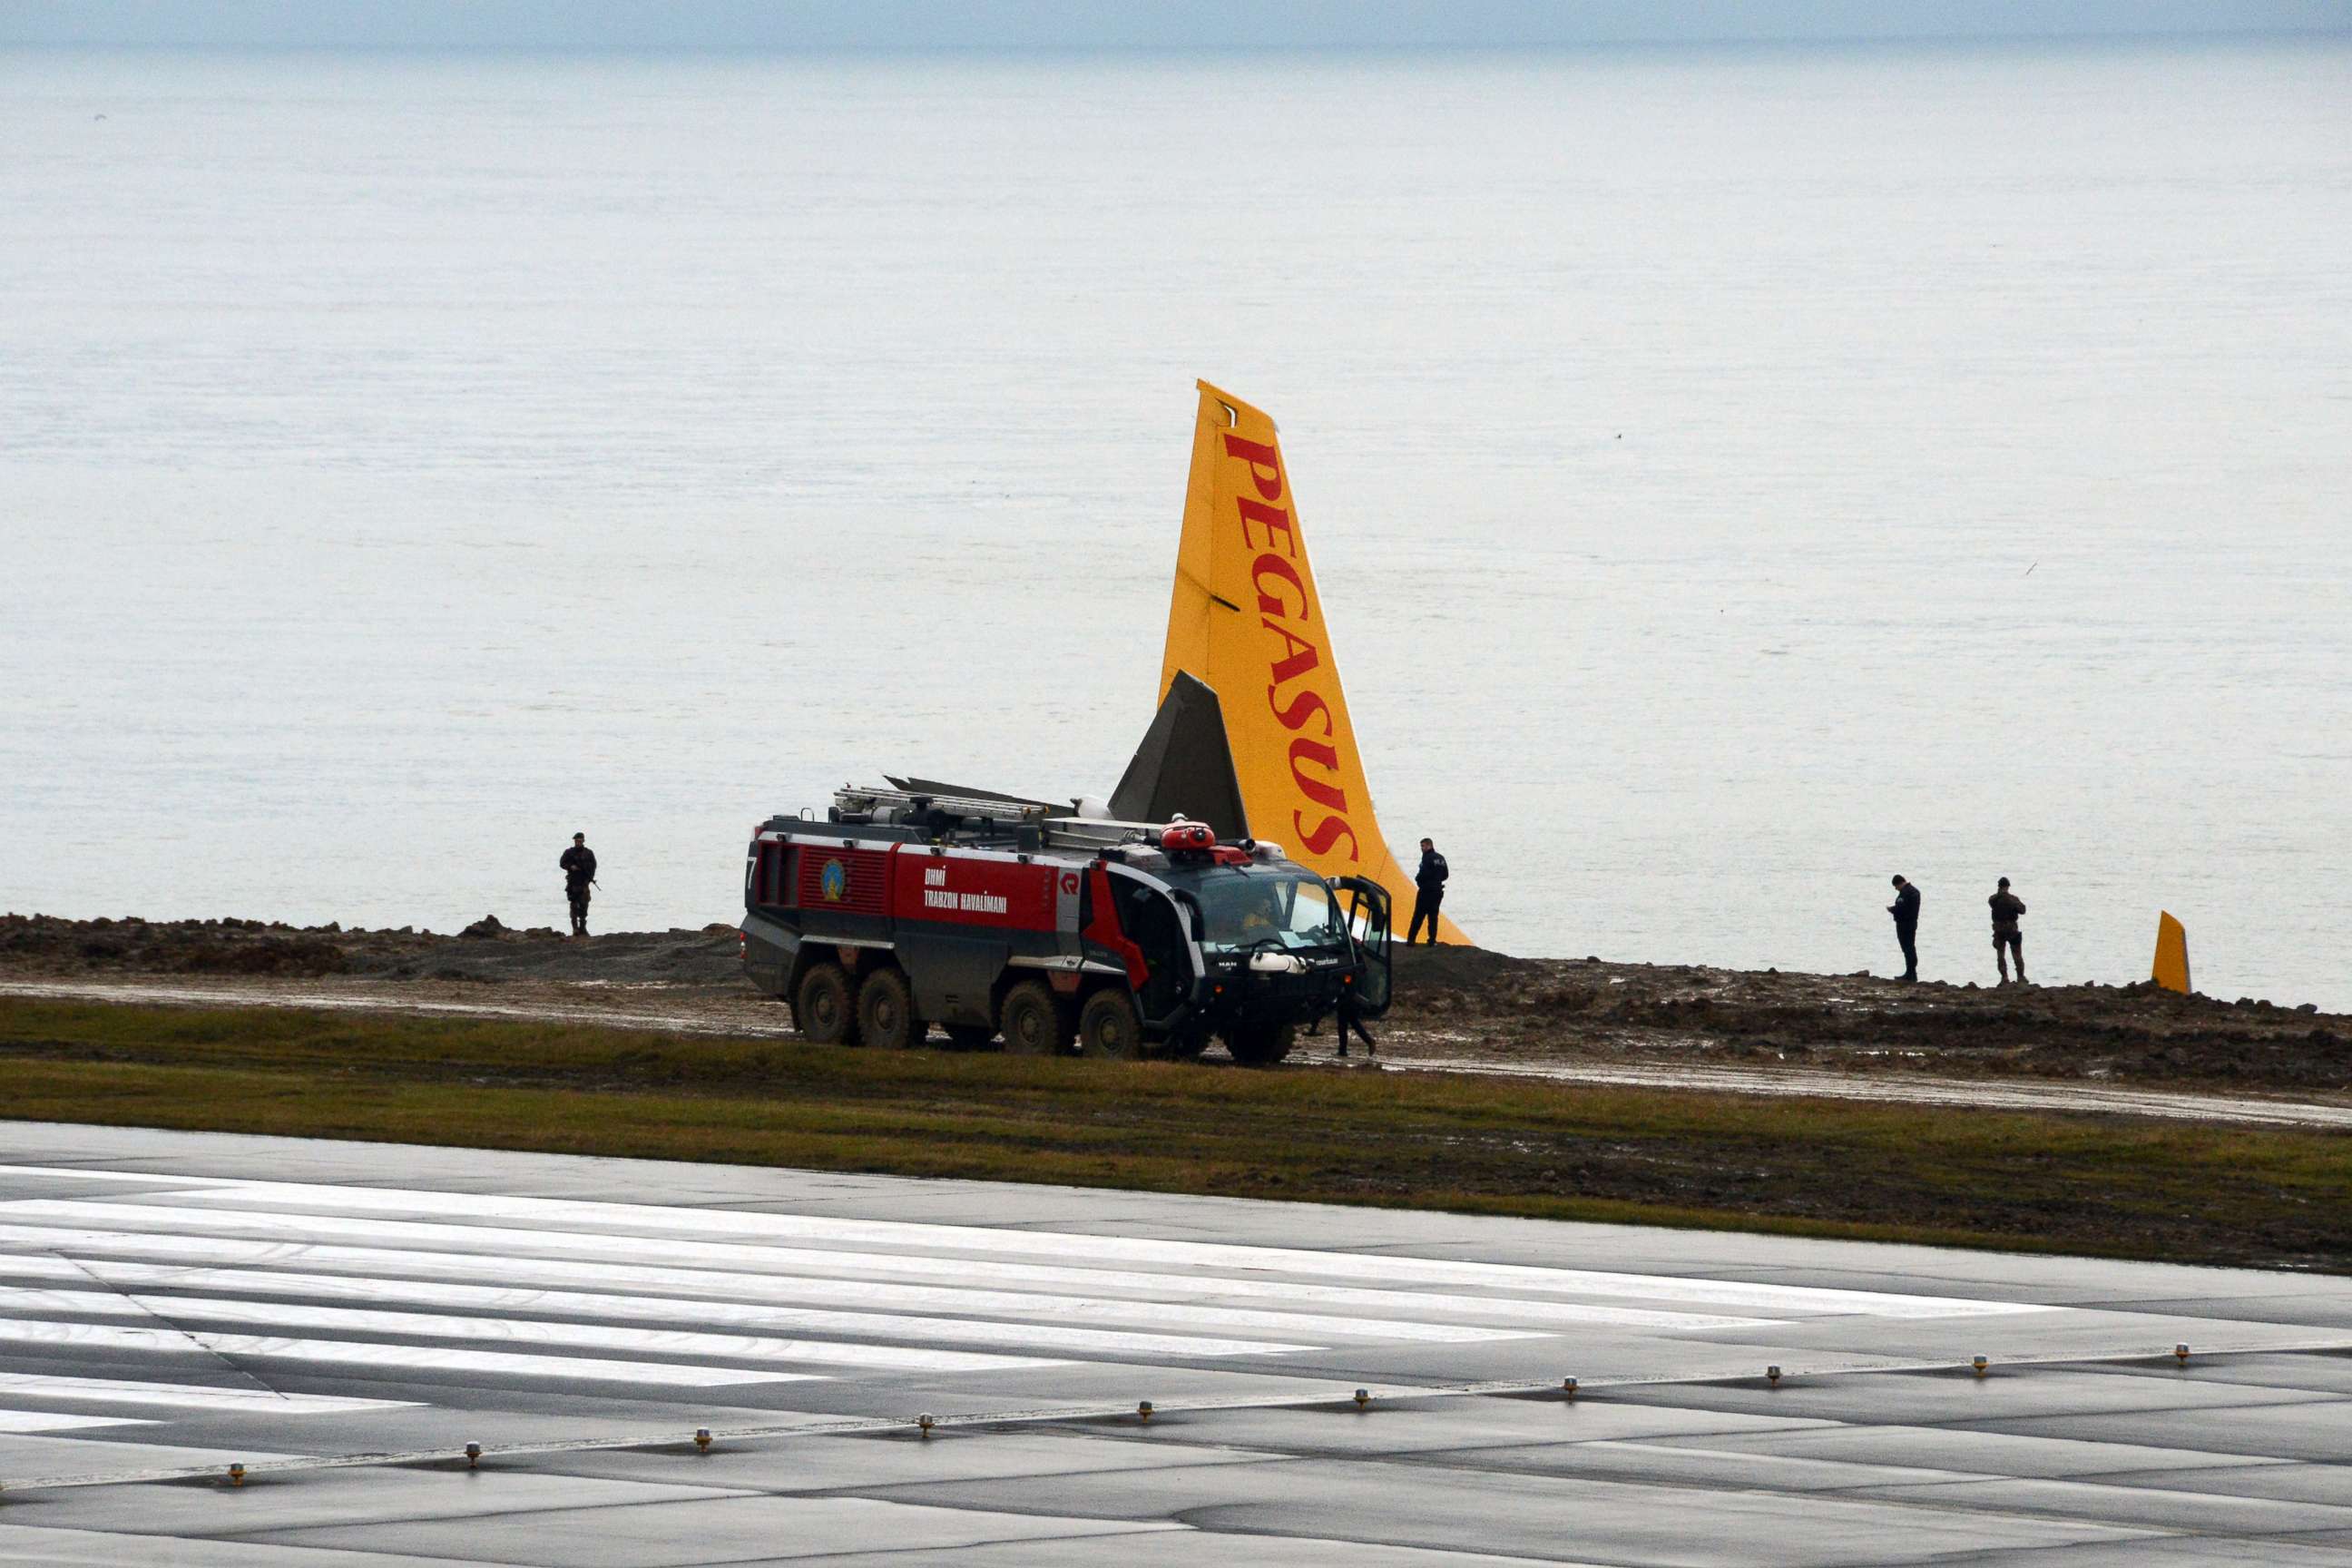 PHOTO: The site of accident where a Pegasus Airlines airplane skidded off the runway at Trabzon airport by the Black Sea in Trabzon, Turkey is pictured Jan. 14, 2018.